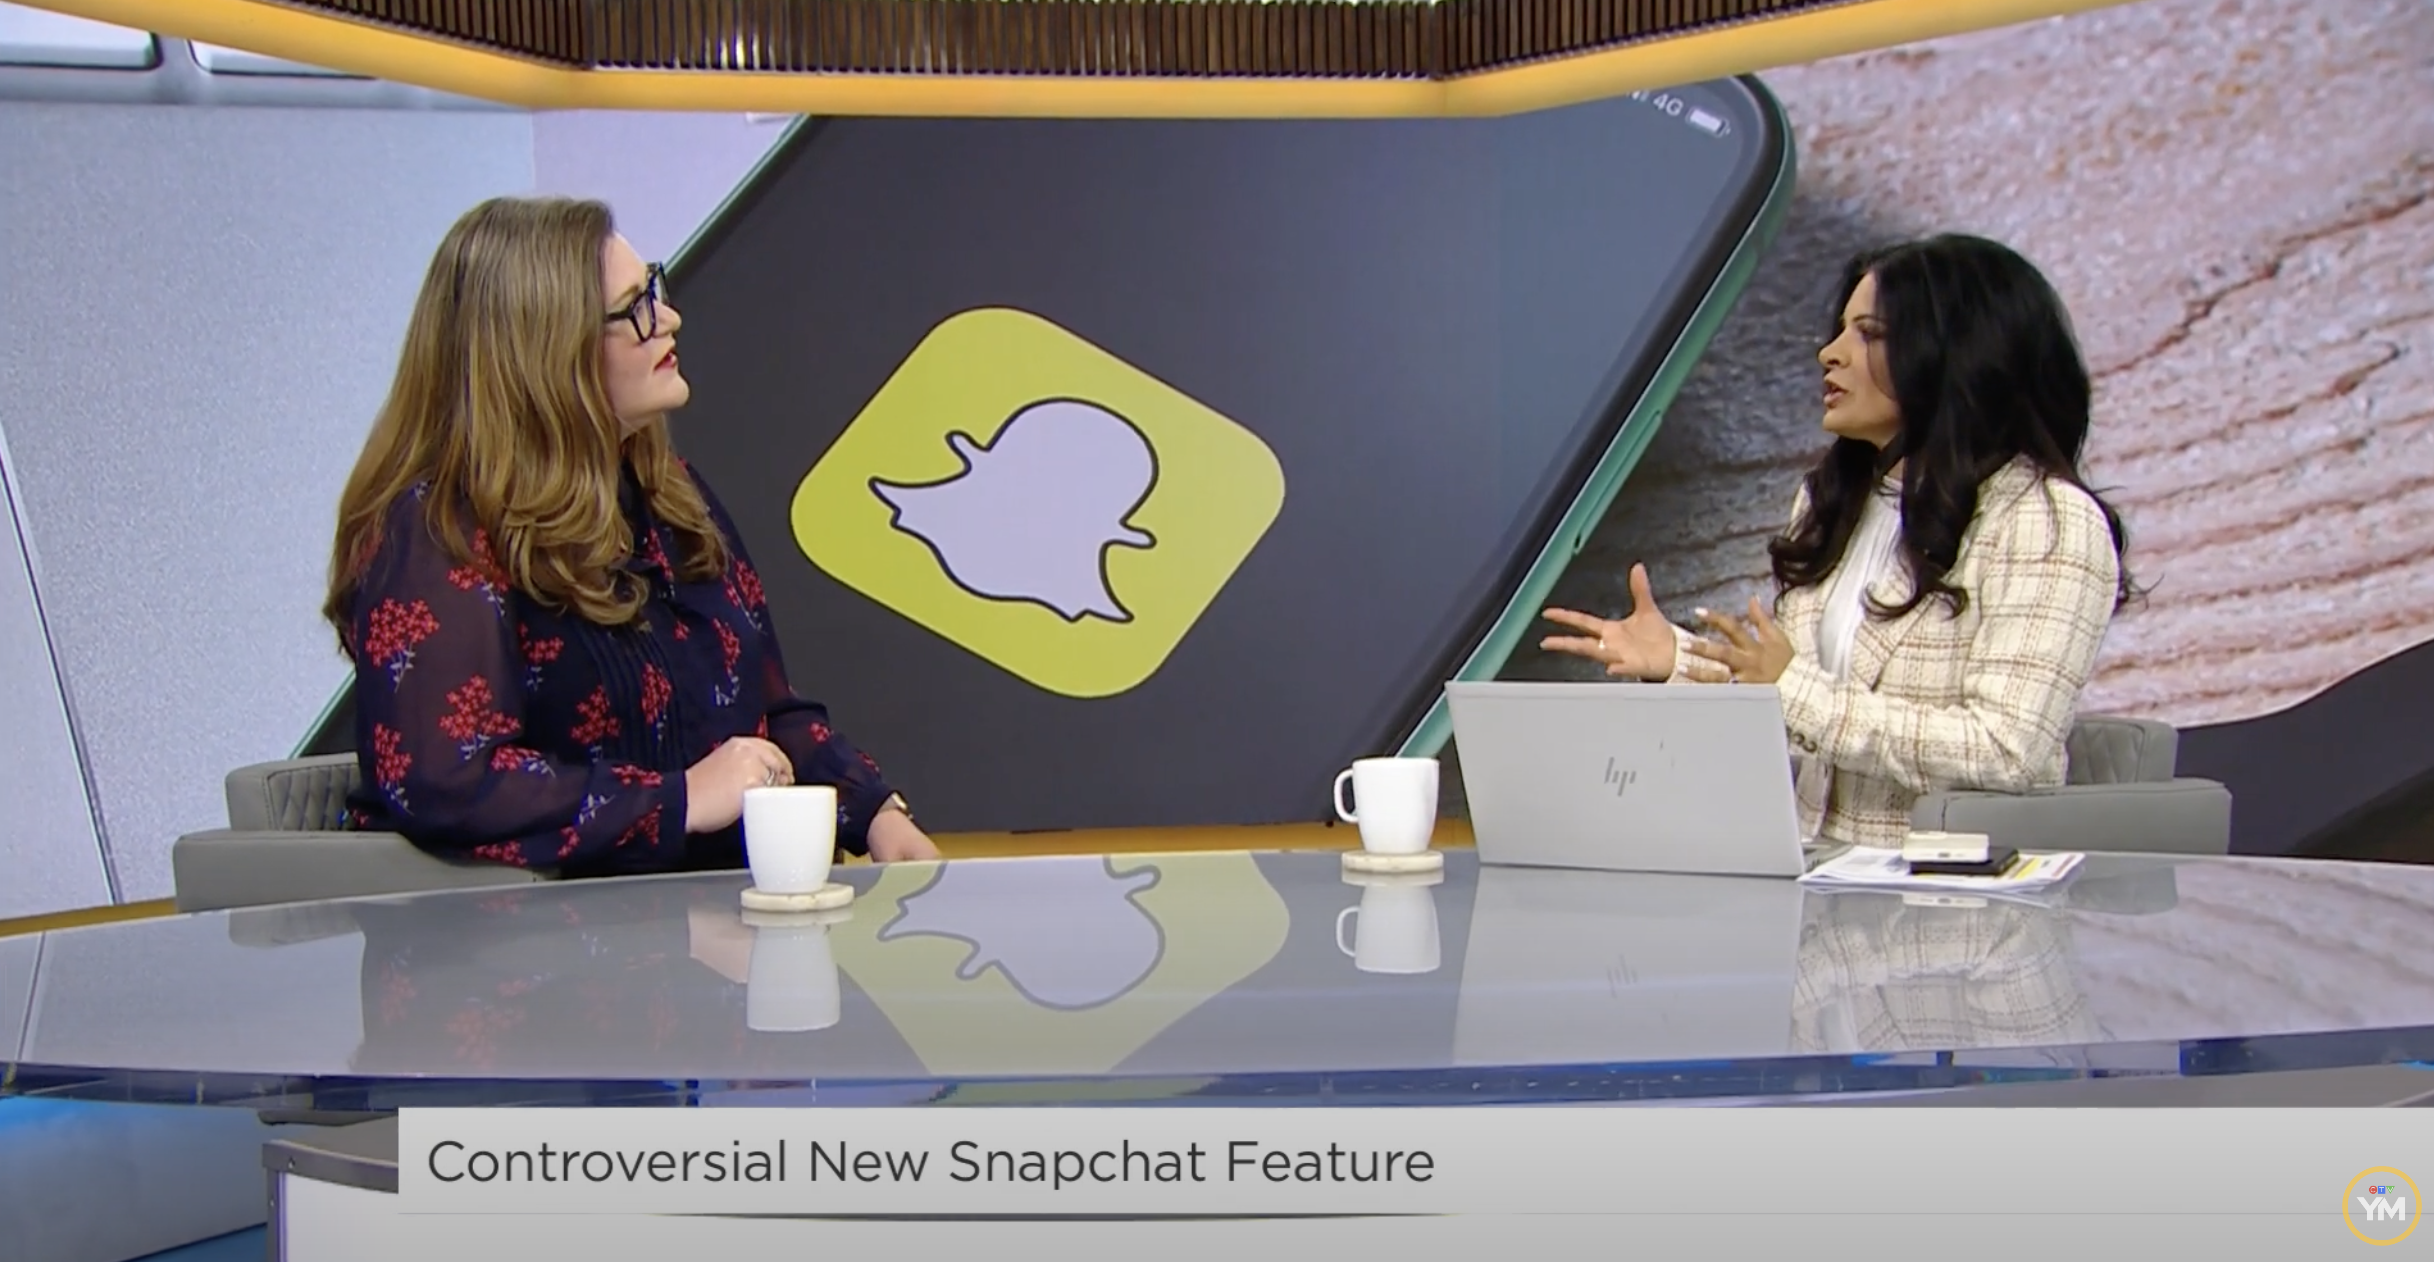 What you need to know about a controversial new Snapchat feature